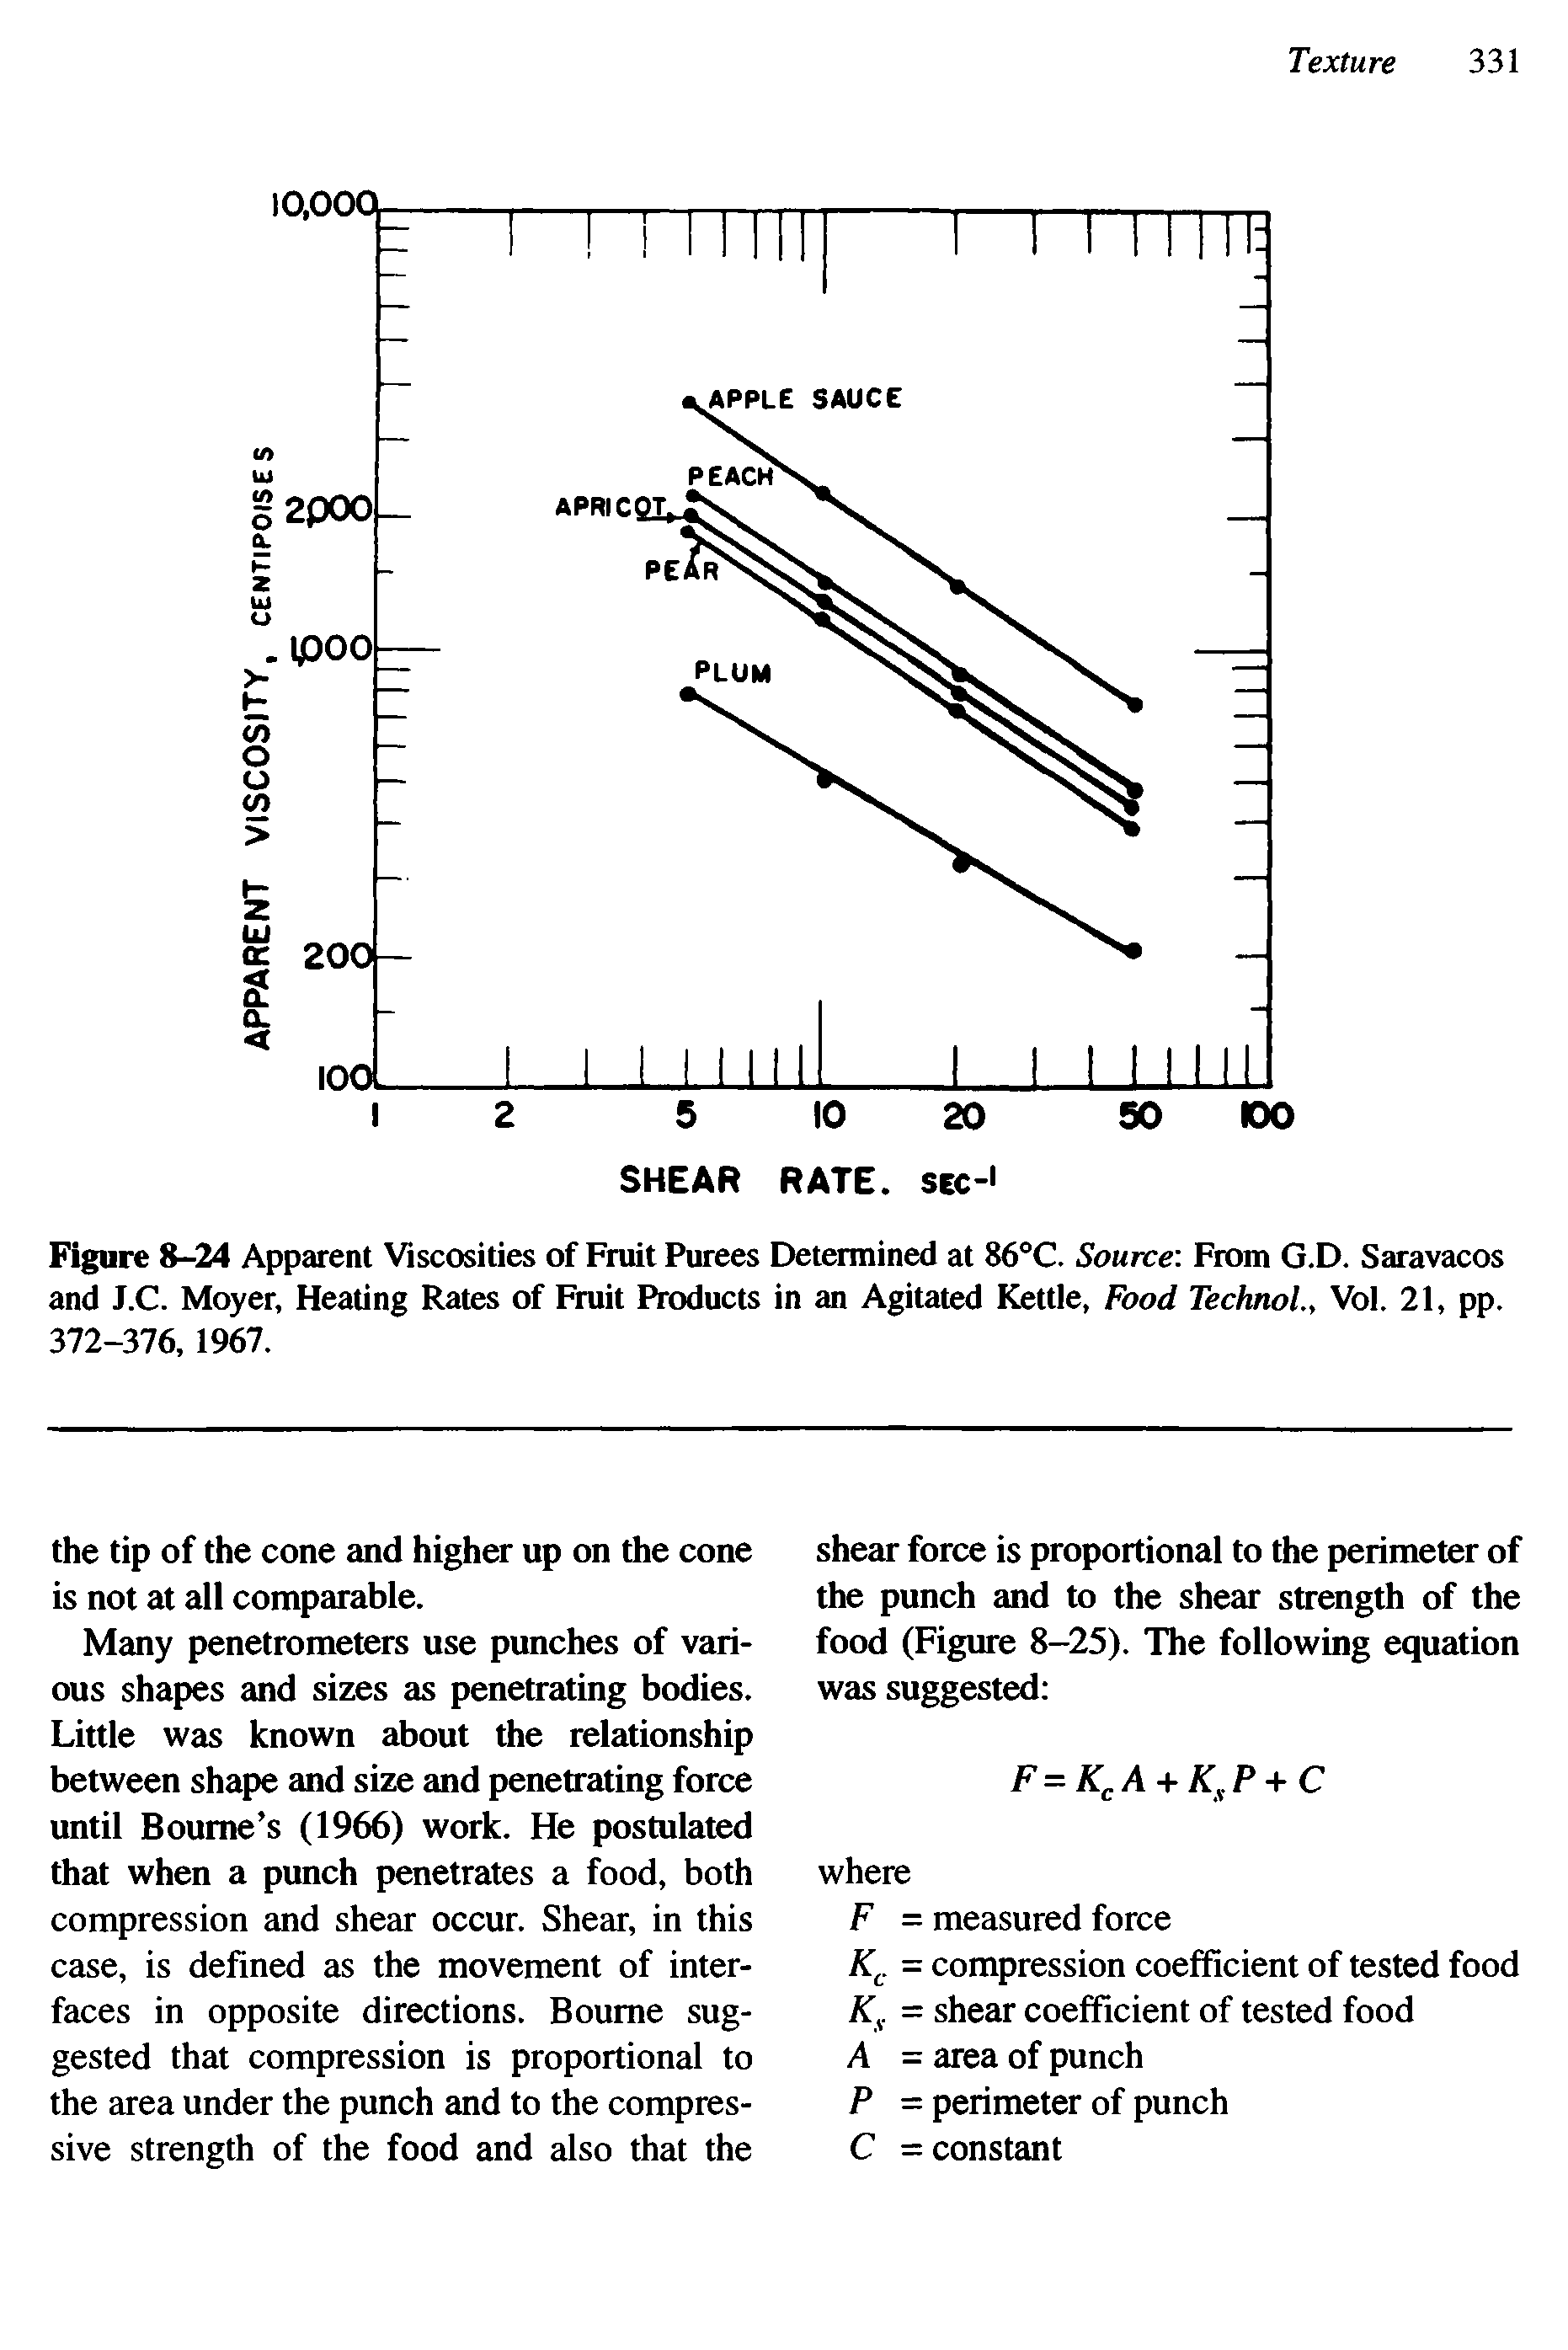 Figure 8-24 Apparent Viscosities of Fruit Purees Determined at 86°C. Source From G.D. Saravacos and J.C. Moyer, Heating Rates of Fruit Products in an Agitated Kettle, Food Technol., Vol. 21, pp. 372-376, 1967.